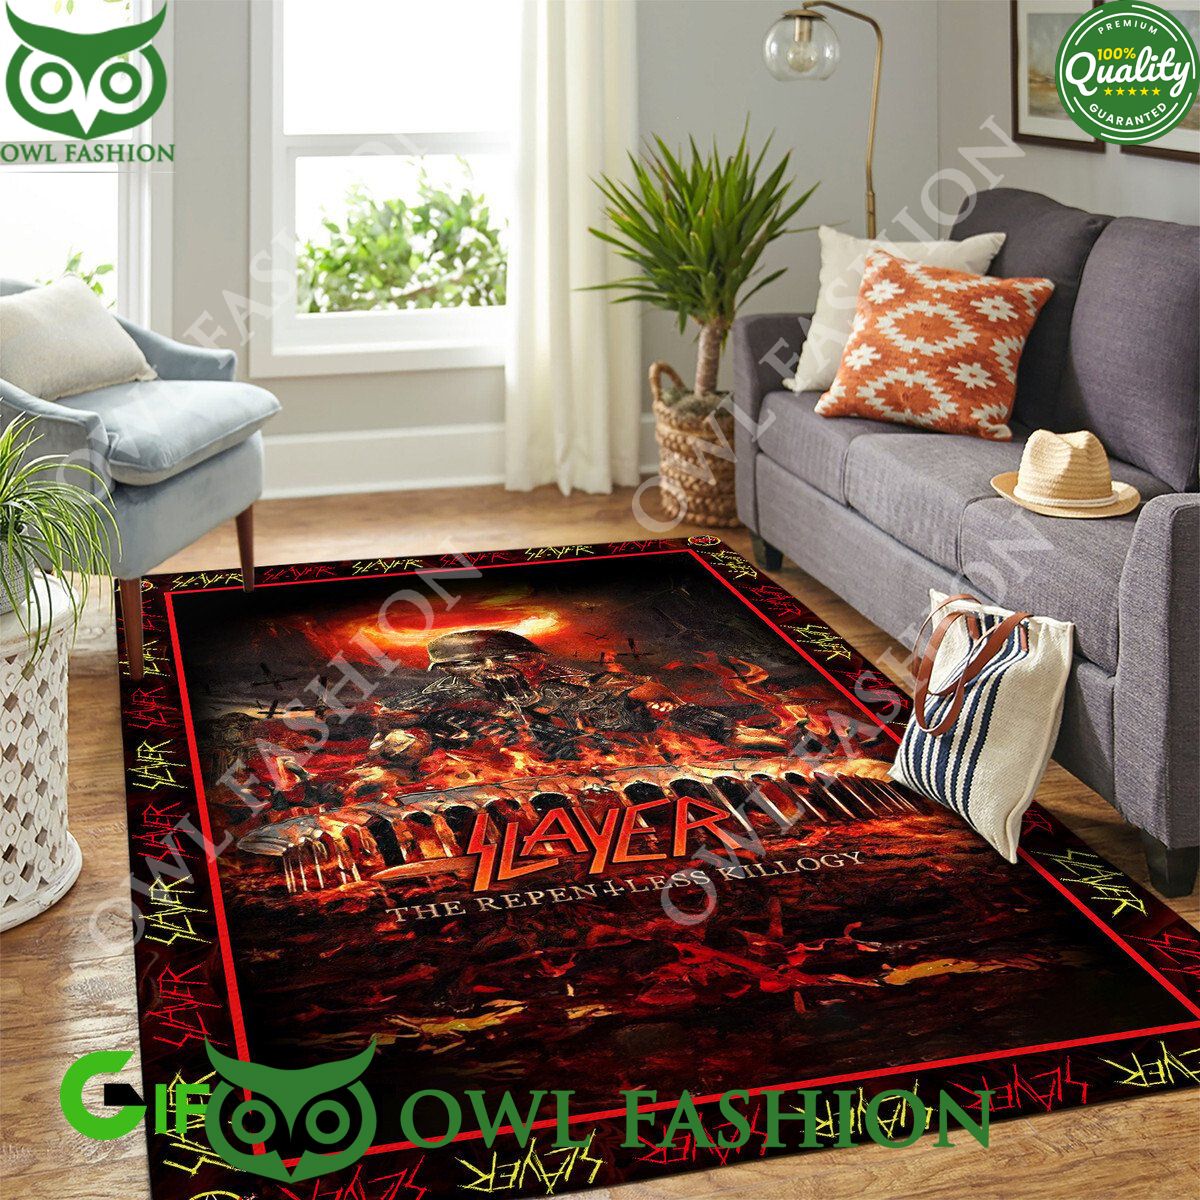 Music Slayer Metal Band Rug Carpet Oh my God you have put on so much!